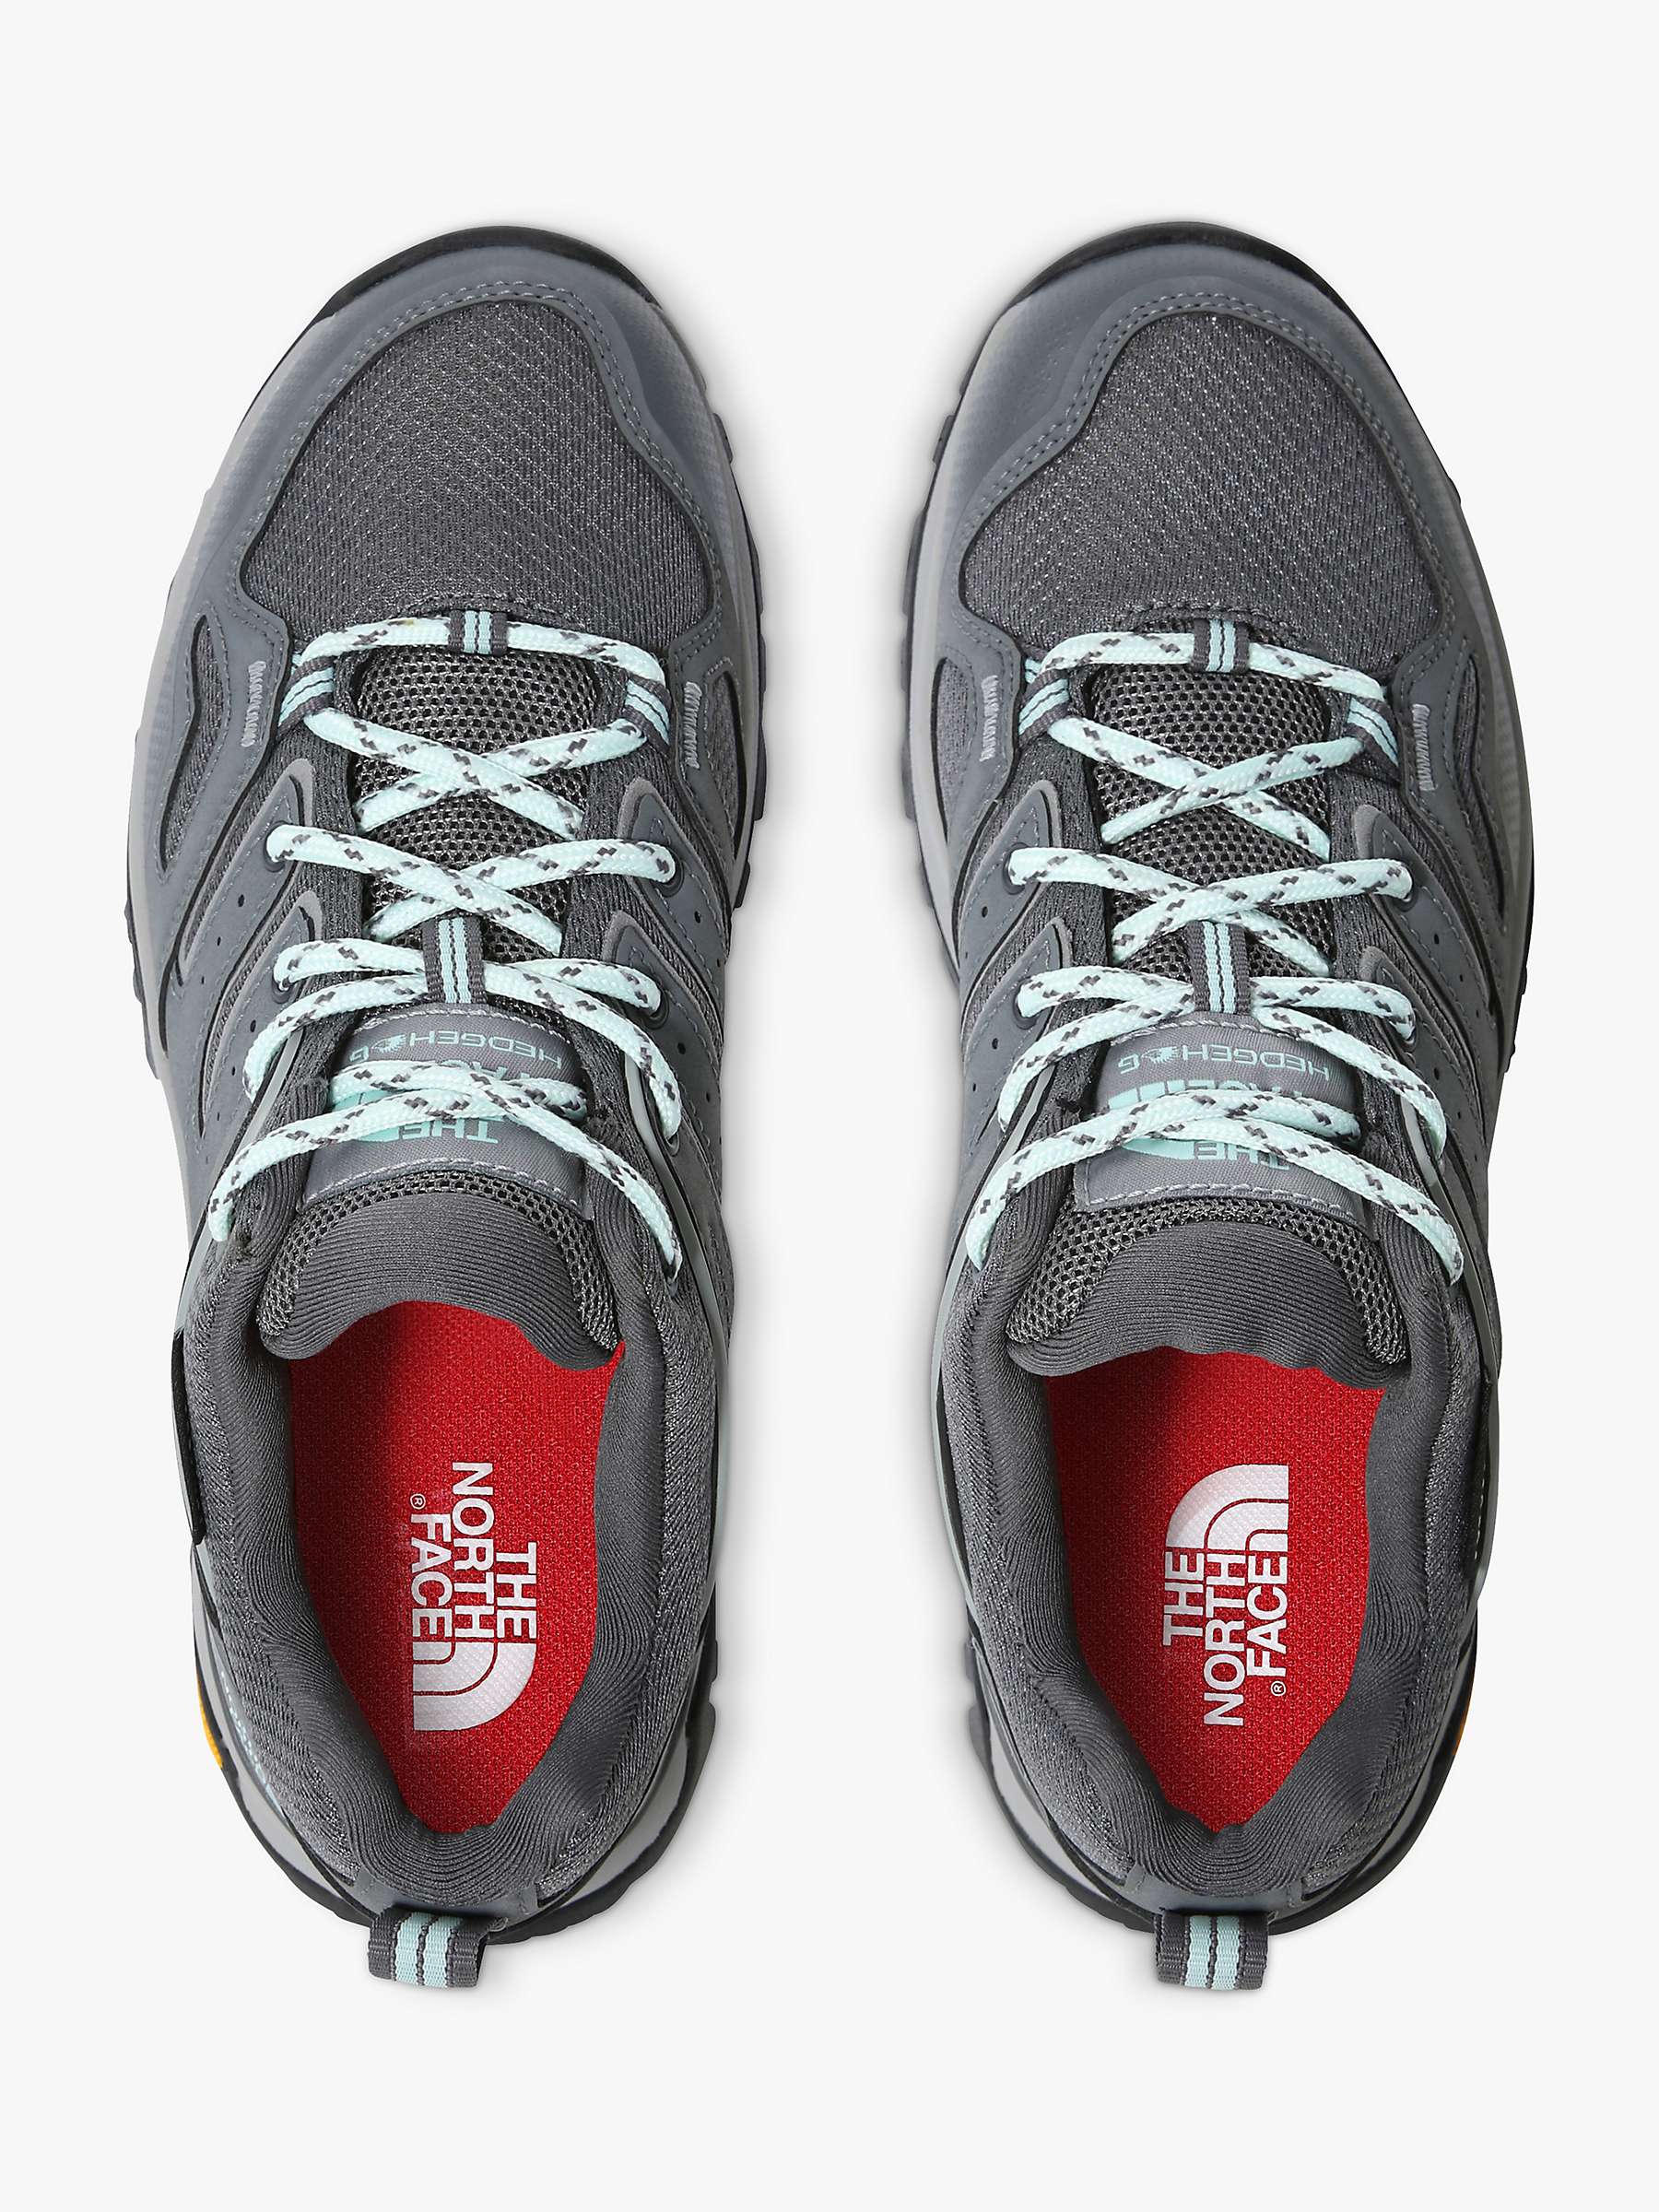 Buy The North Face Hedgehog Future Light Hiking Shoes, Grey Online at johnlewis.com